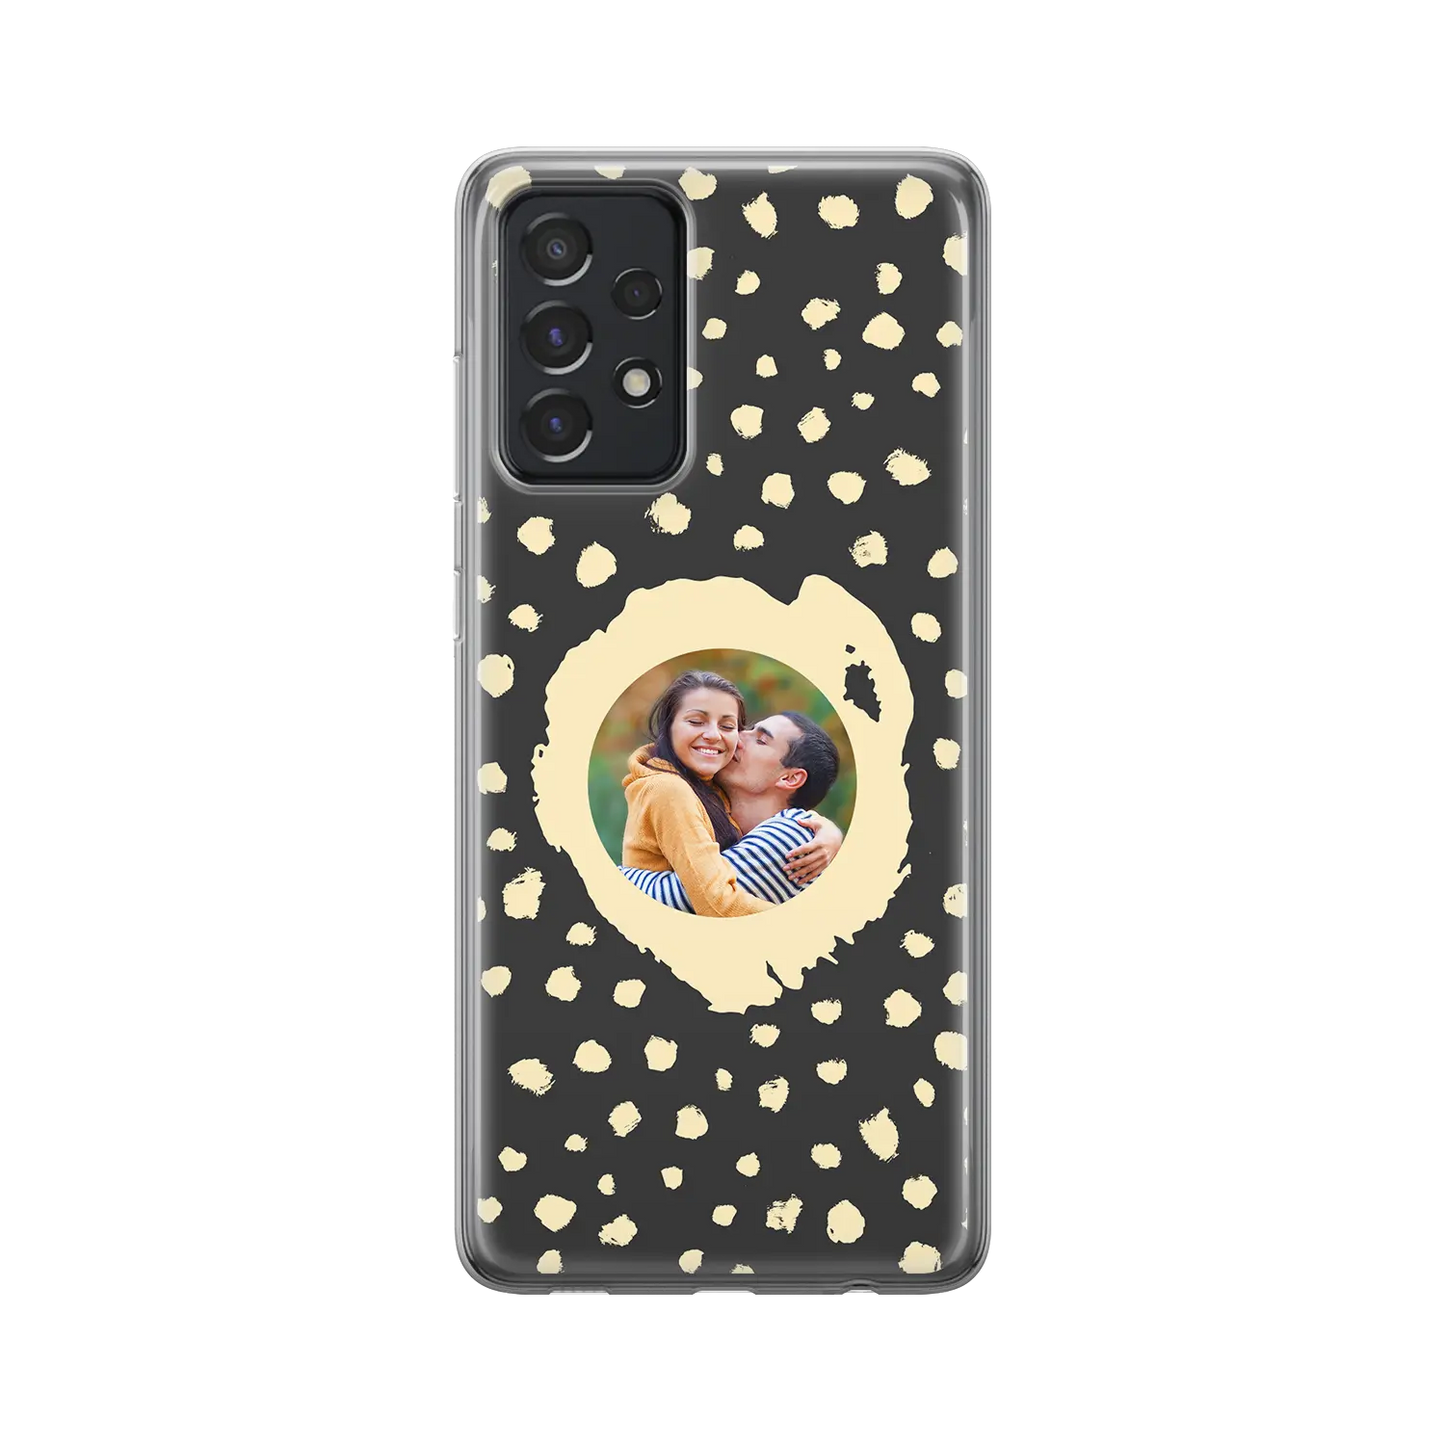 Grunge Dots Photo Style - Personalised Galaxy A Case